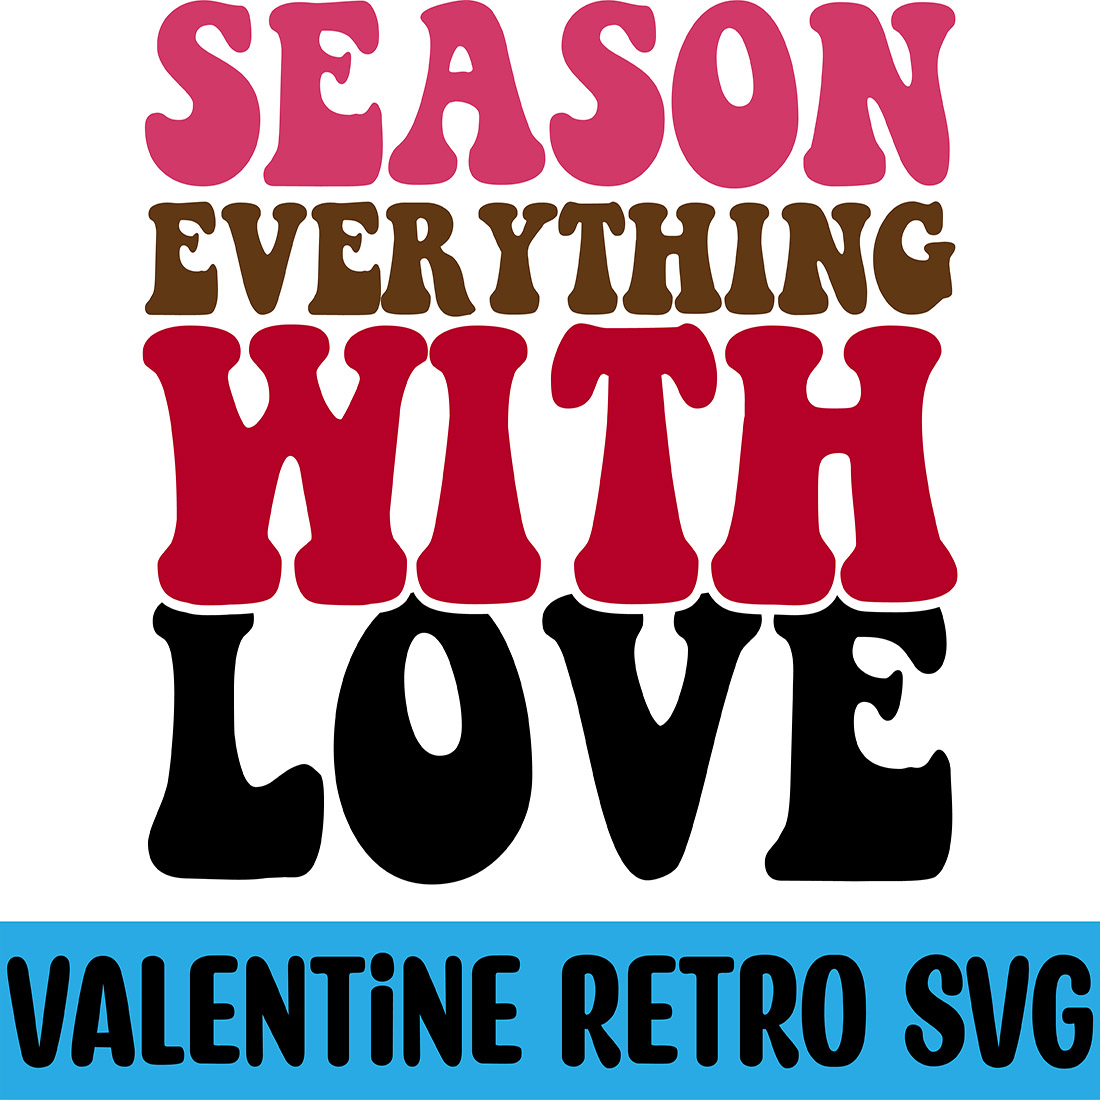 Season Everything with Love Retro SVG cover image.